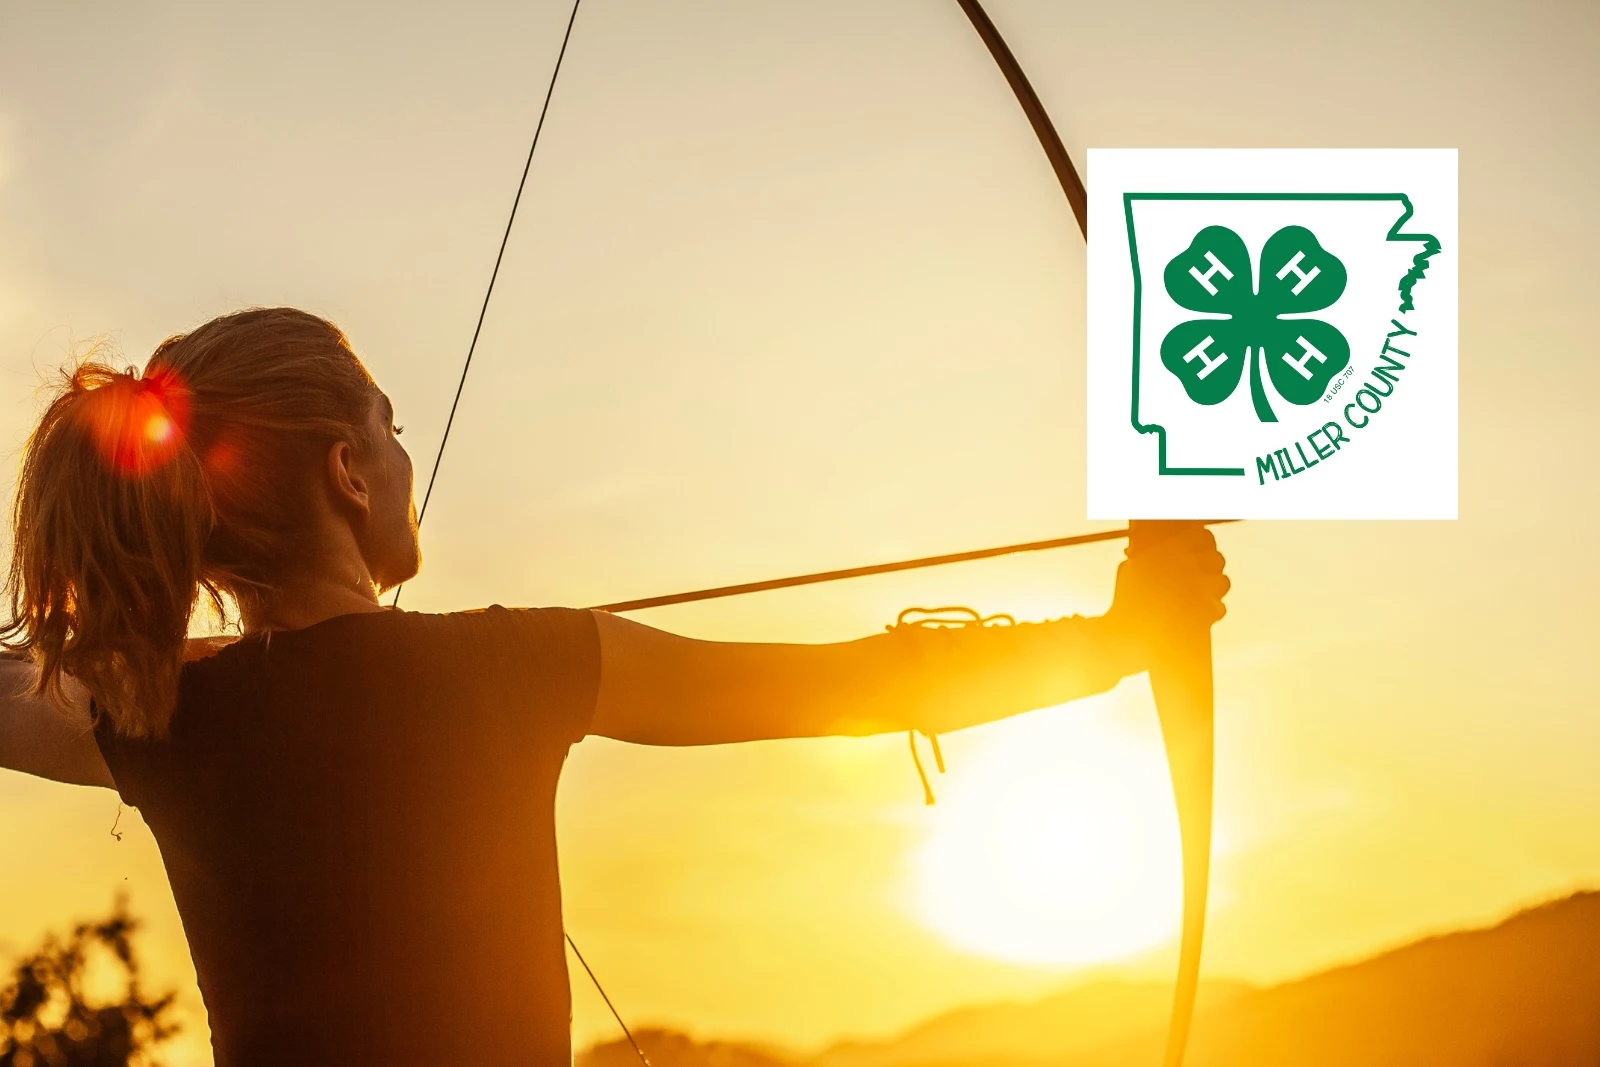 Want To Join the Miller County 4-H Archery Club?